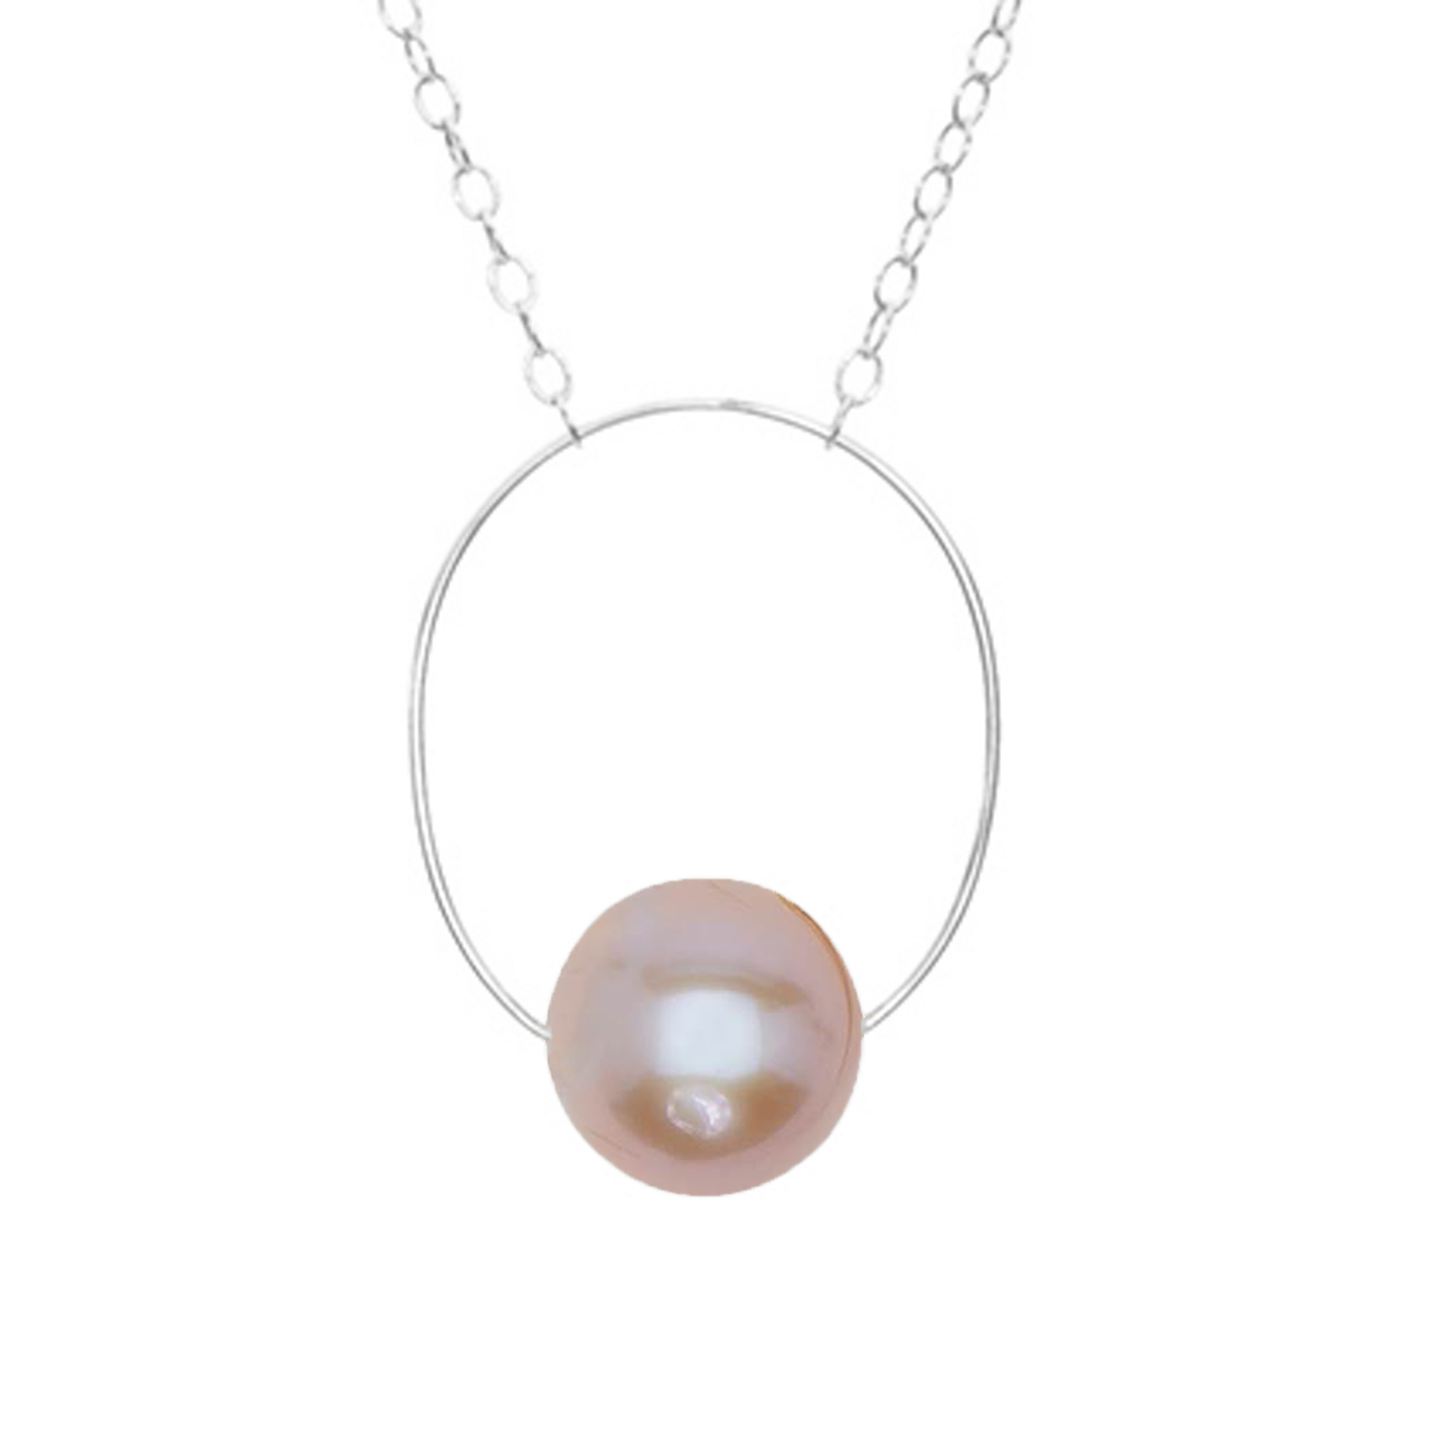 Medium Oval Pendant Necklace with Round Freshwater Pearl